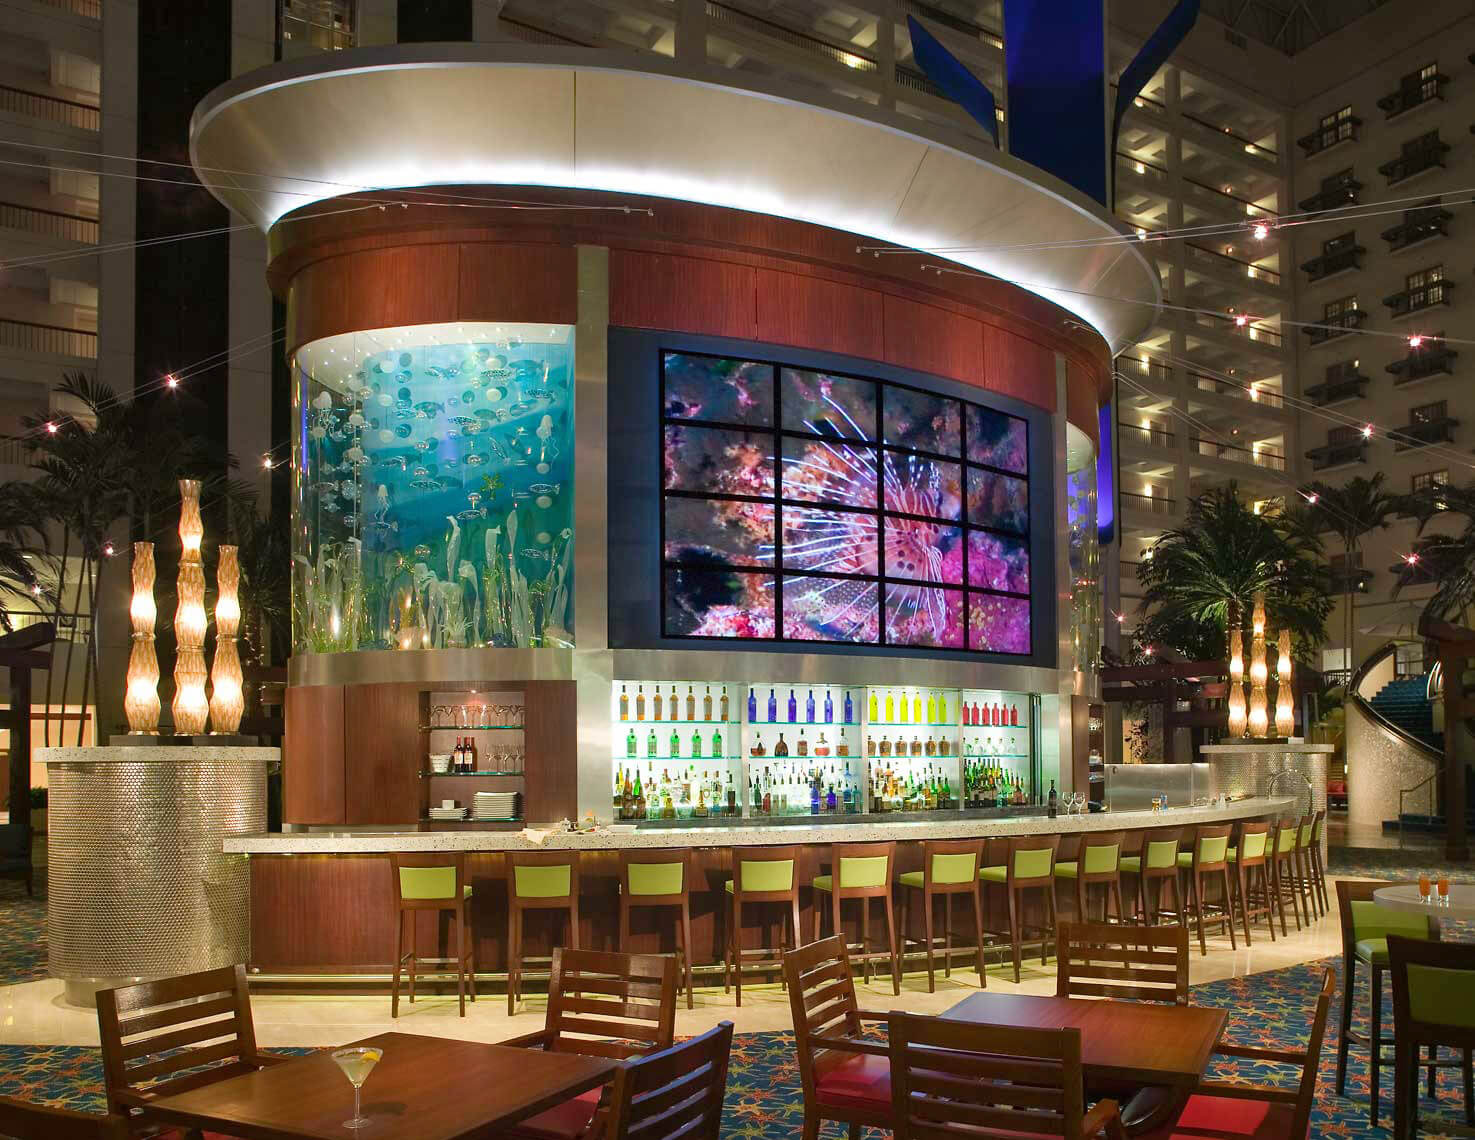 An eye-catching view of the bar and aquarium in the atrium lobby of the Renaissance Orlando Resort at Sea World